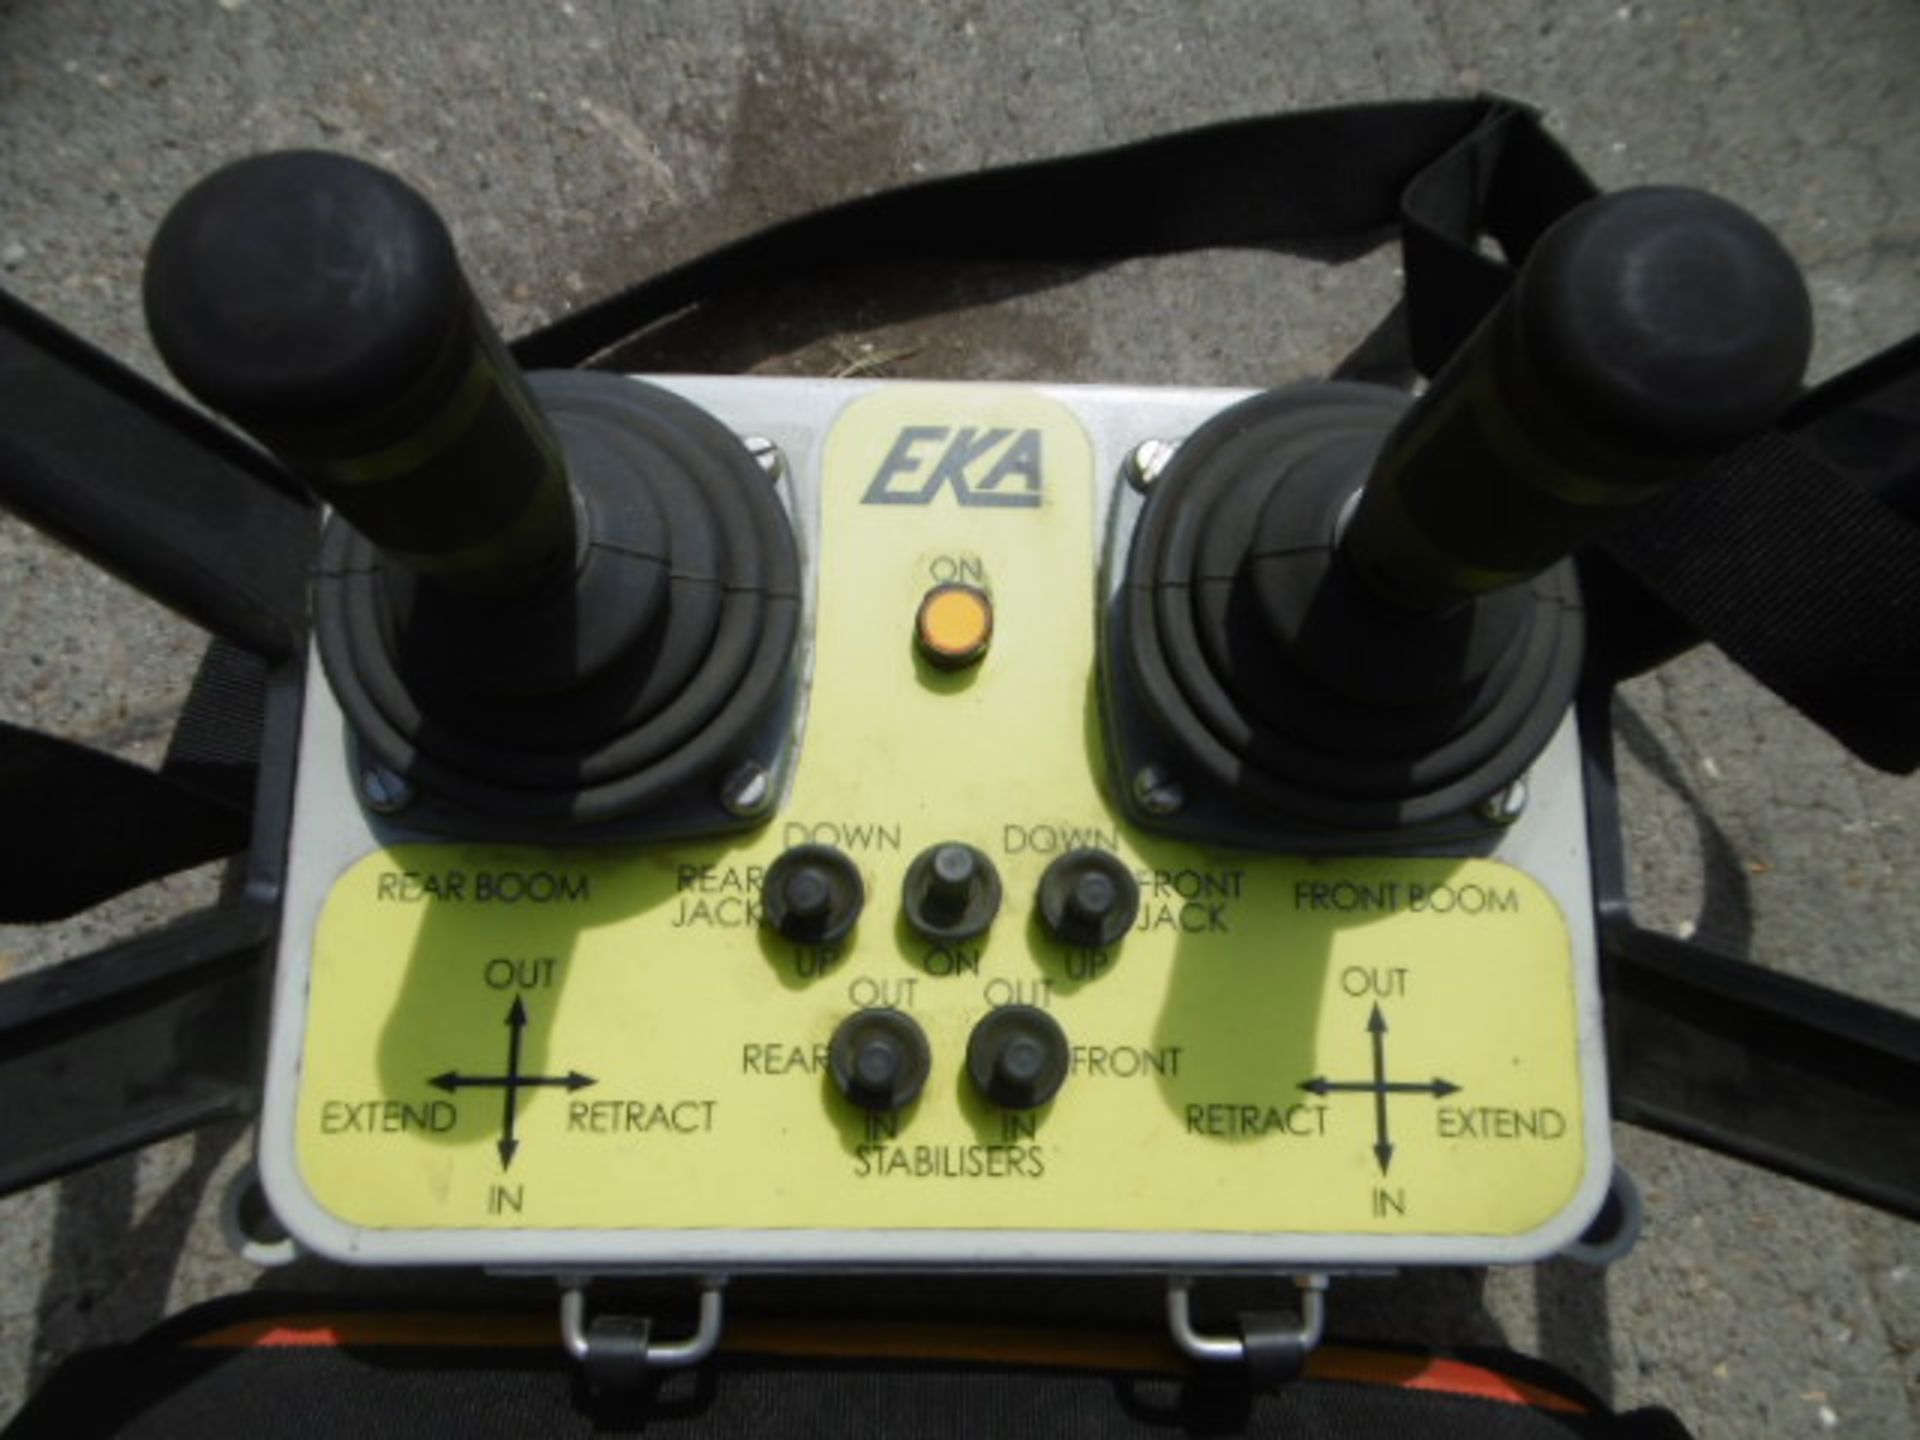 EKA Recovery Unit Remote Control - Image 3 of 5